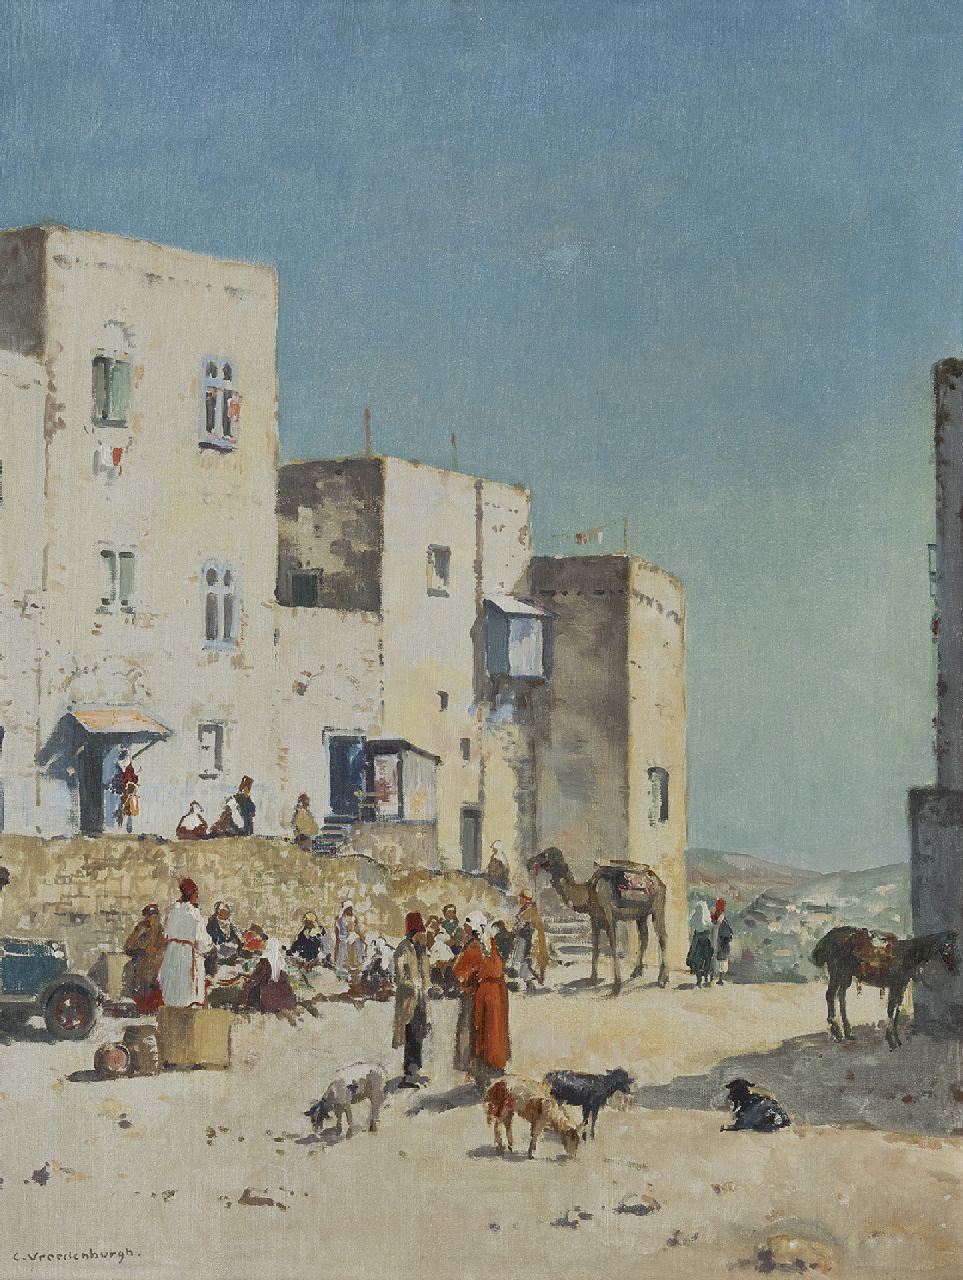 Vreedenburgh C.  | Cornelis Vreedenburgh | Paintings offered for sale | Village in Palestine, presumably Bethlehem, oil on canvas 50.9 x 38.2 cm, signed l.l. and painted ca. 1936